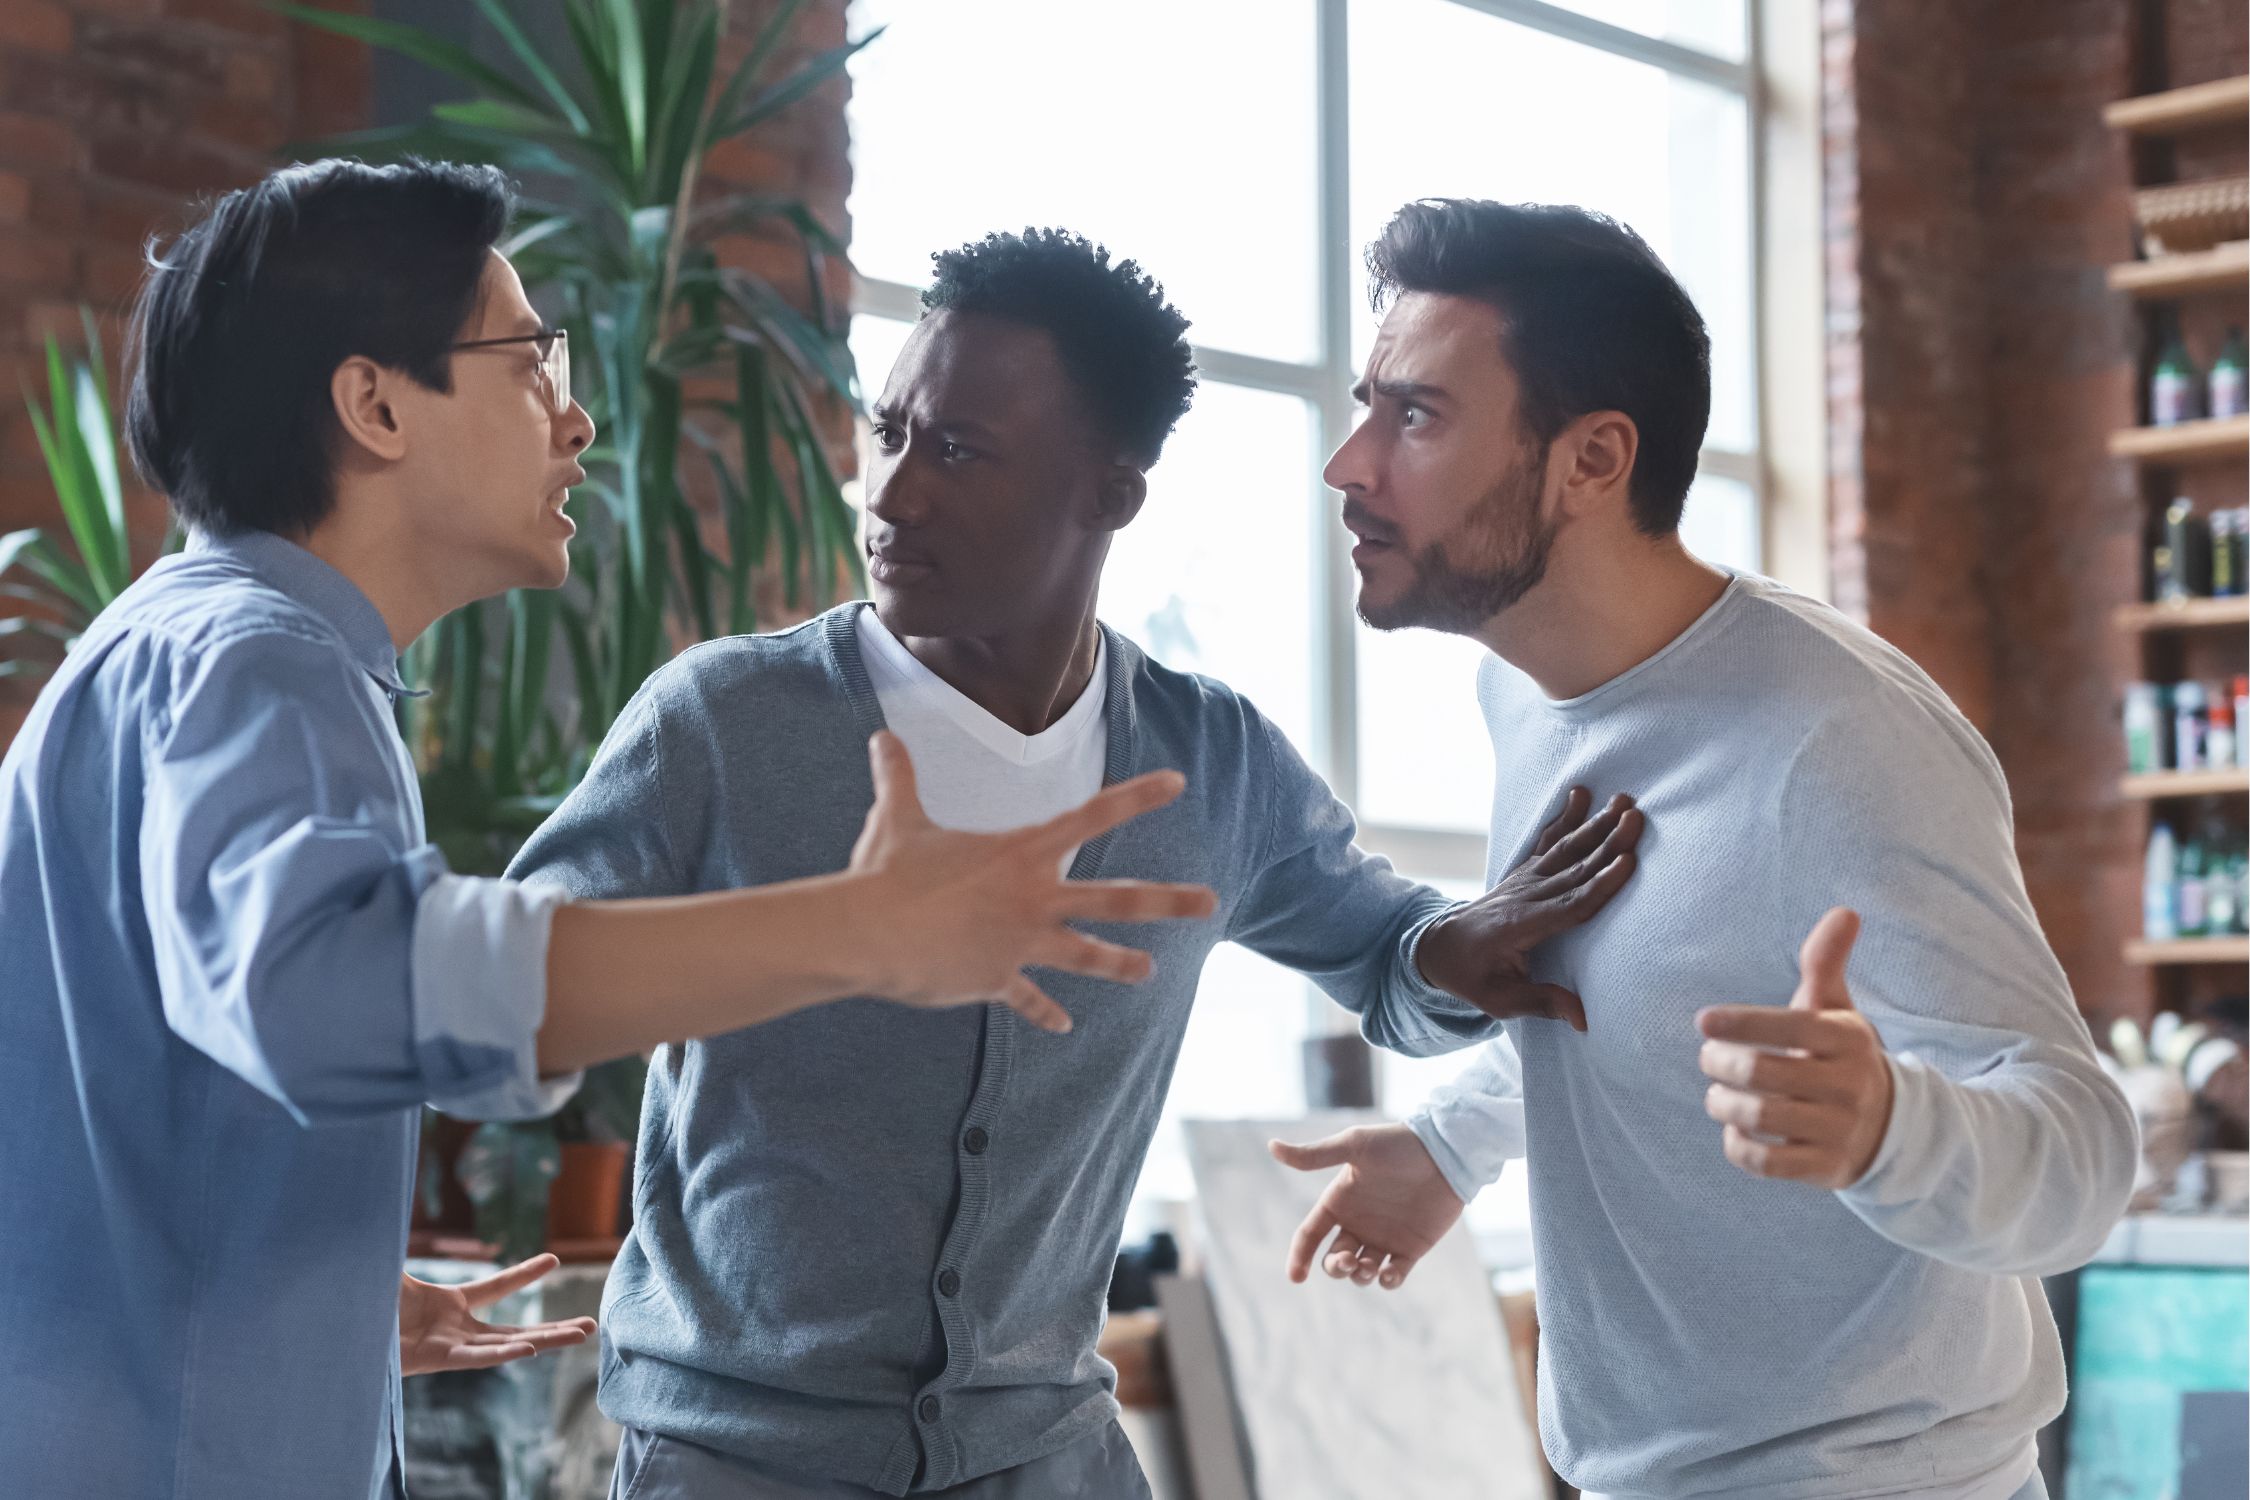 Friends unable to contain anger towards each other